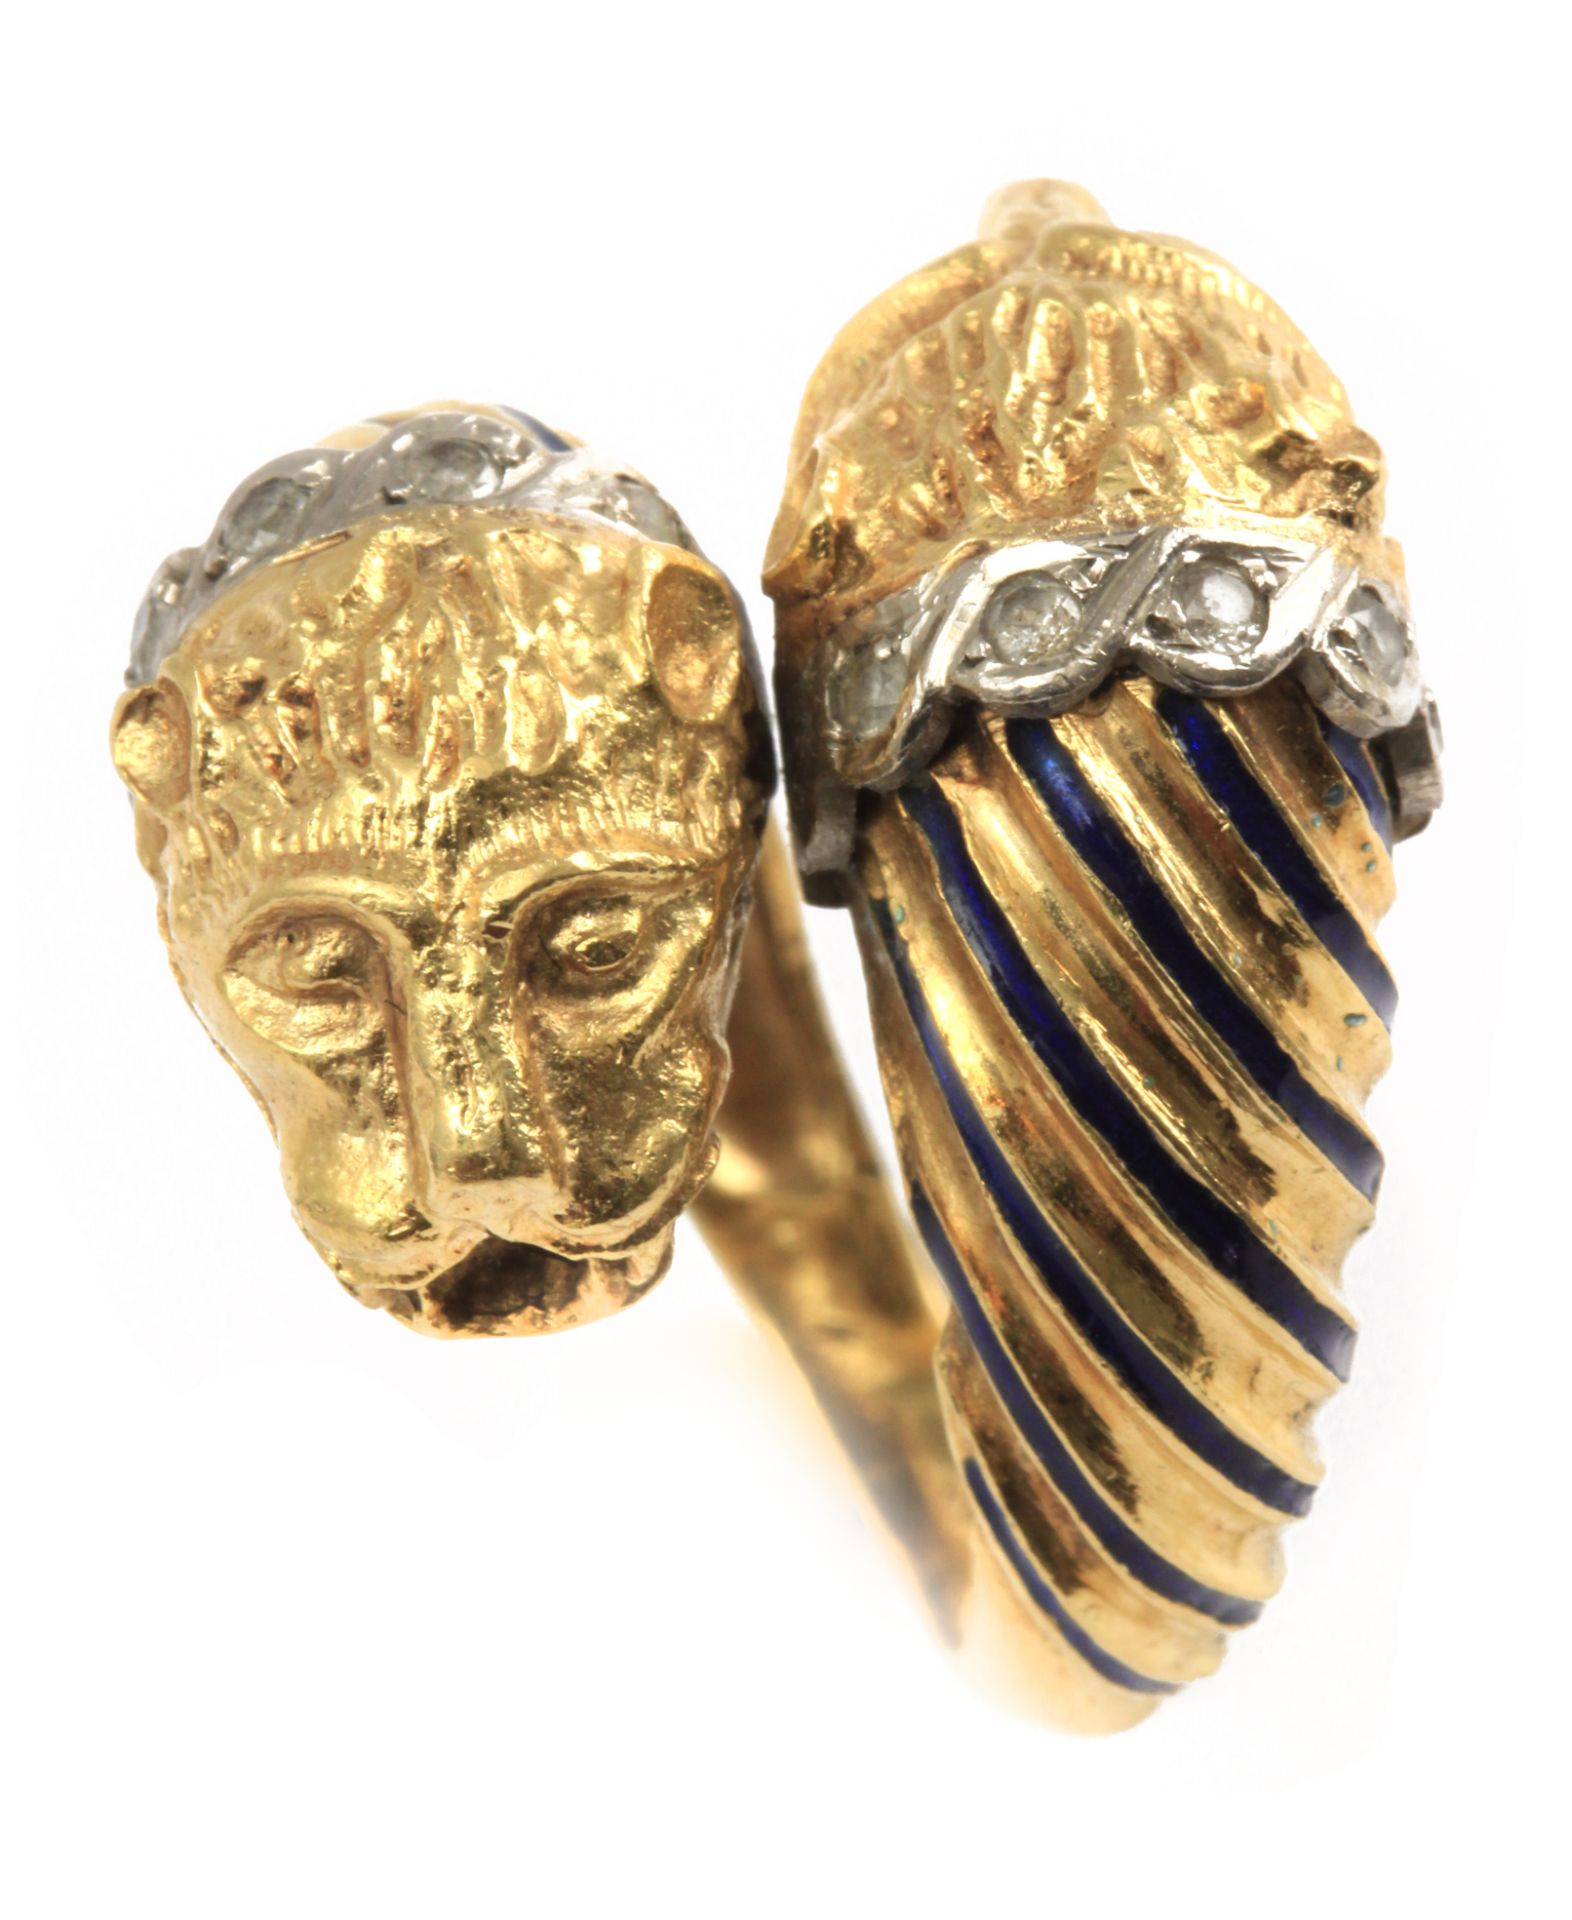 A 20th century Greek Renaissance revival ring - Image 3 of 3